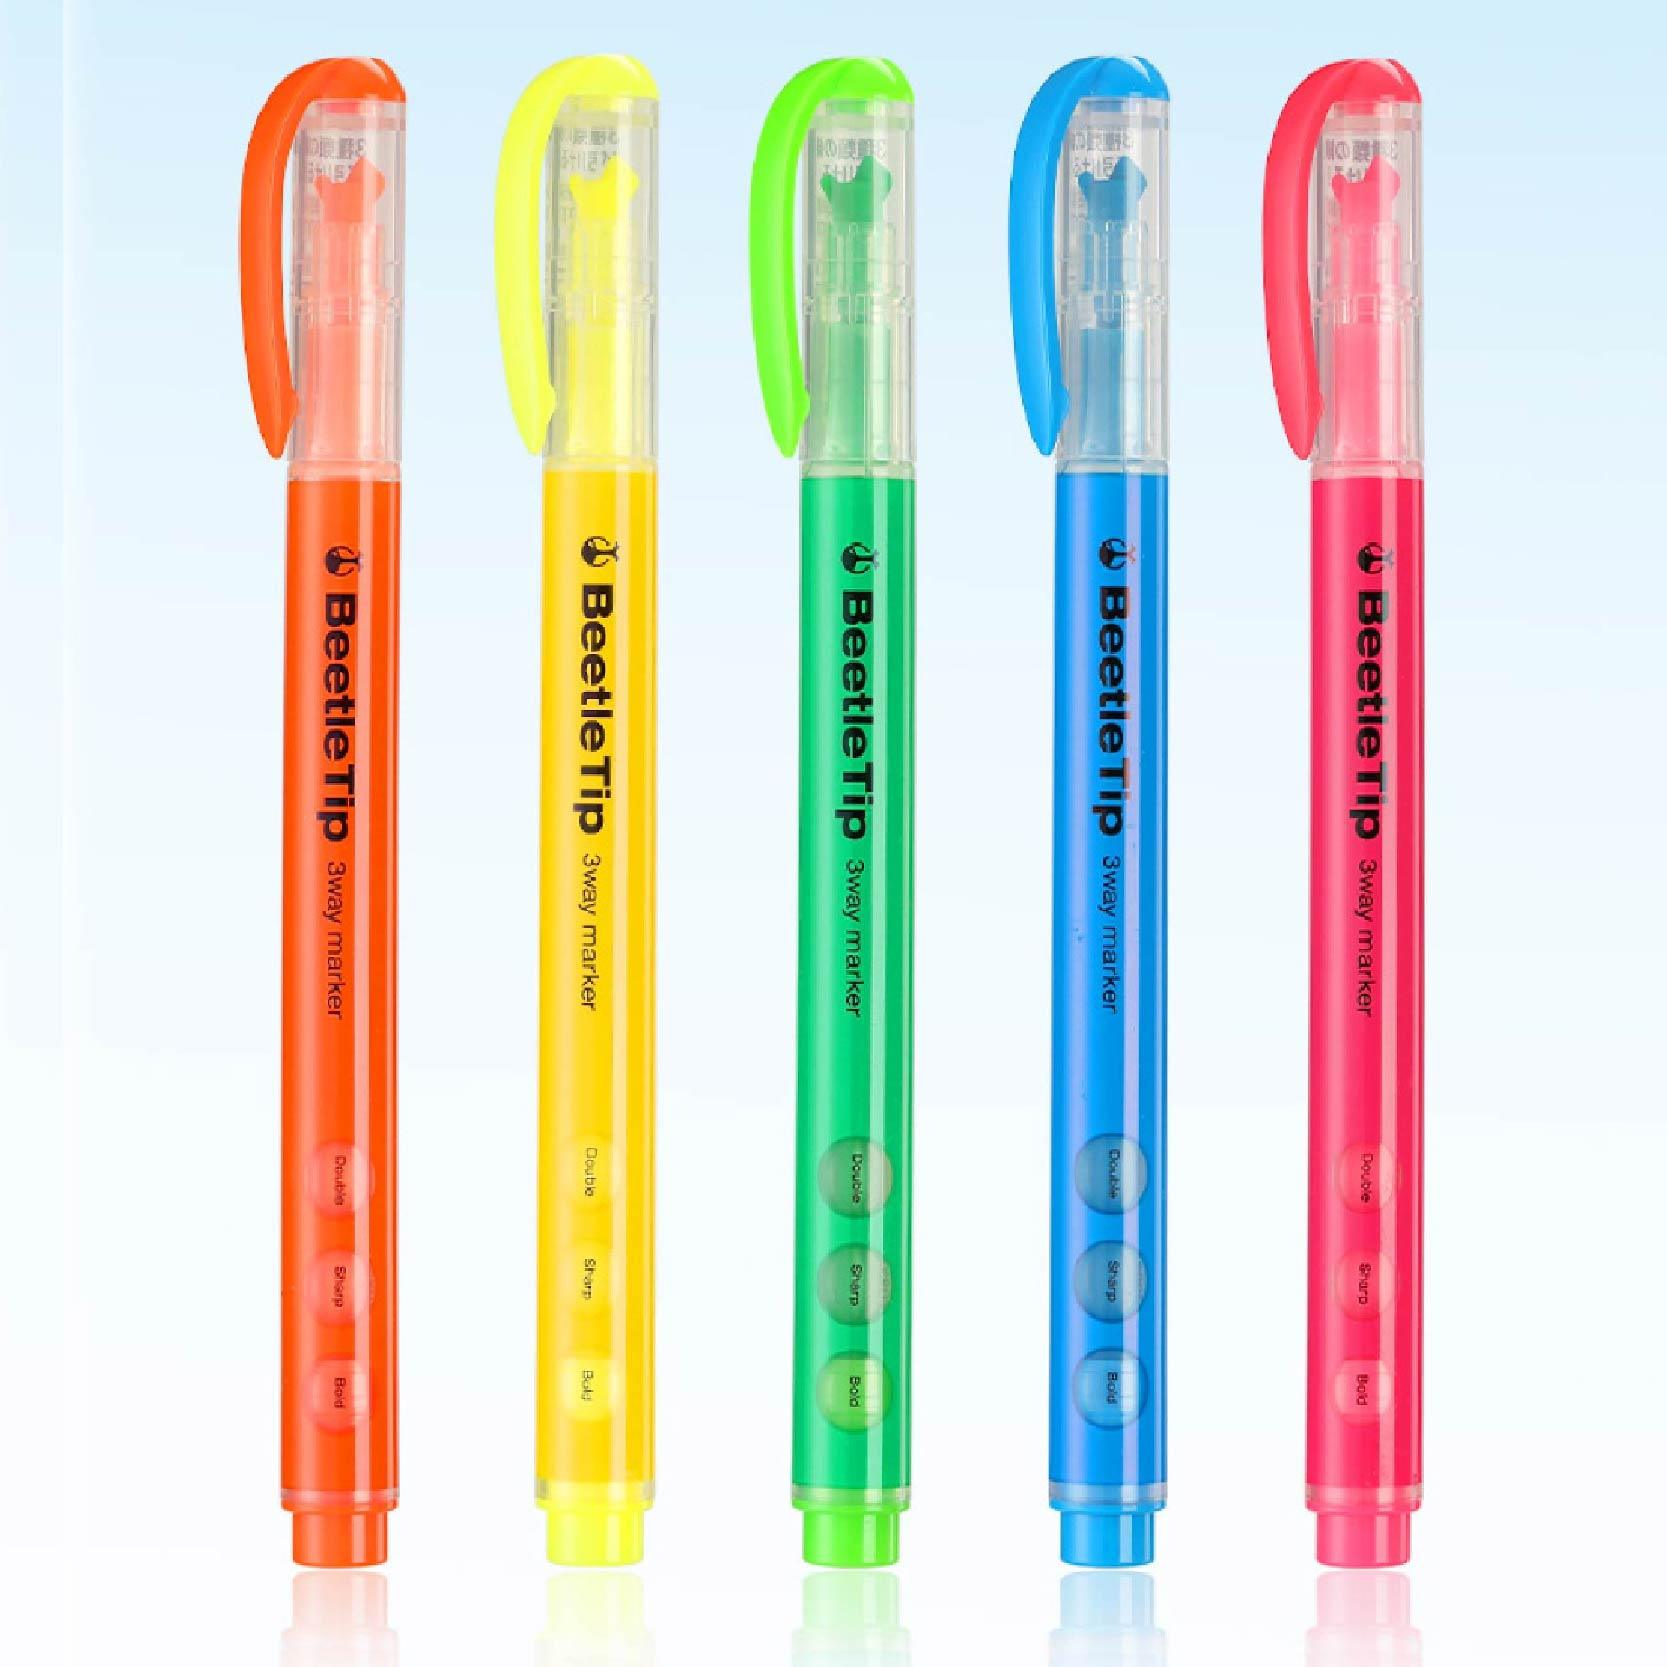 KOKUYO PM-L301-5S BeetleTip beetle highlighter 3 functions multi-angle 5 color set - CHL-STORE 